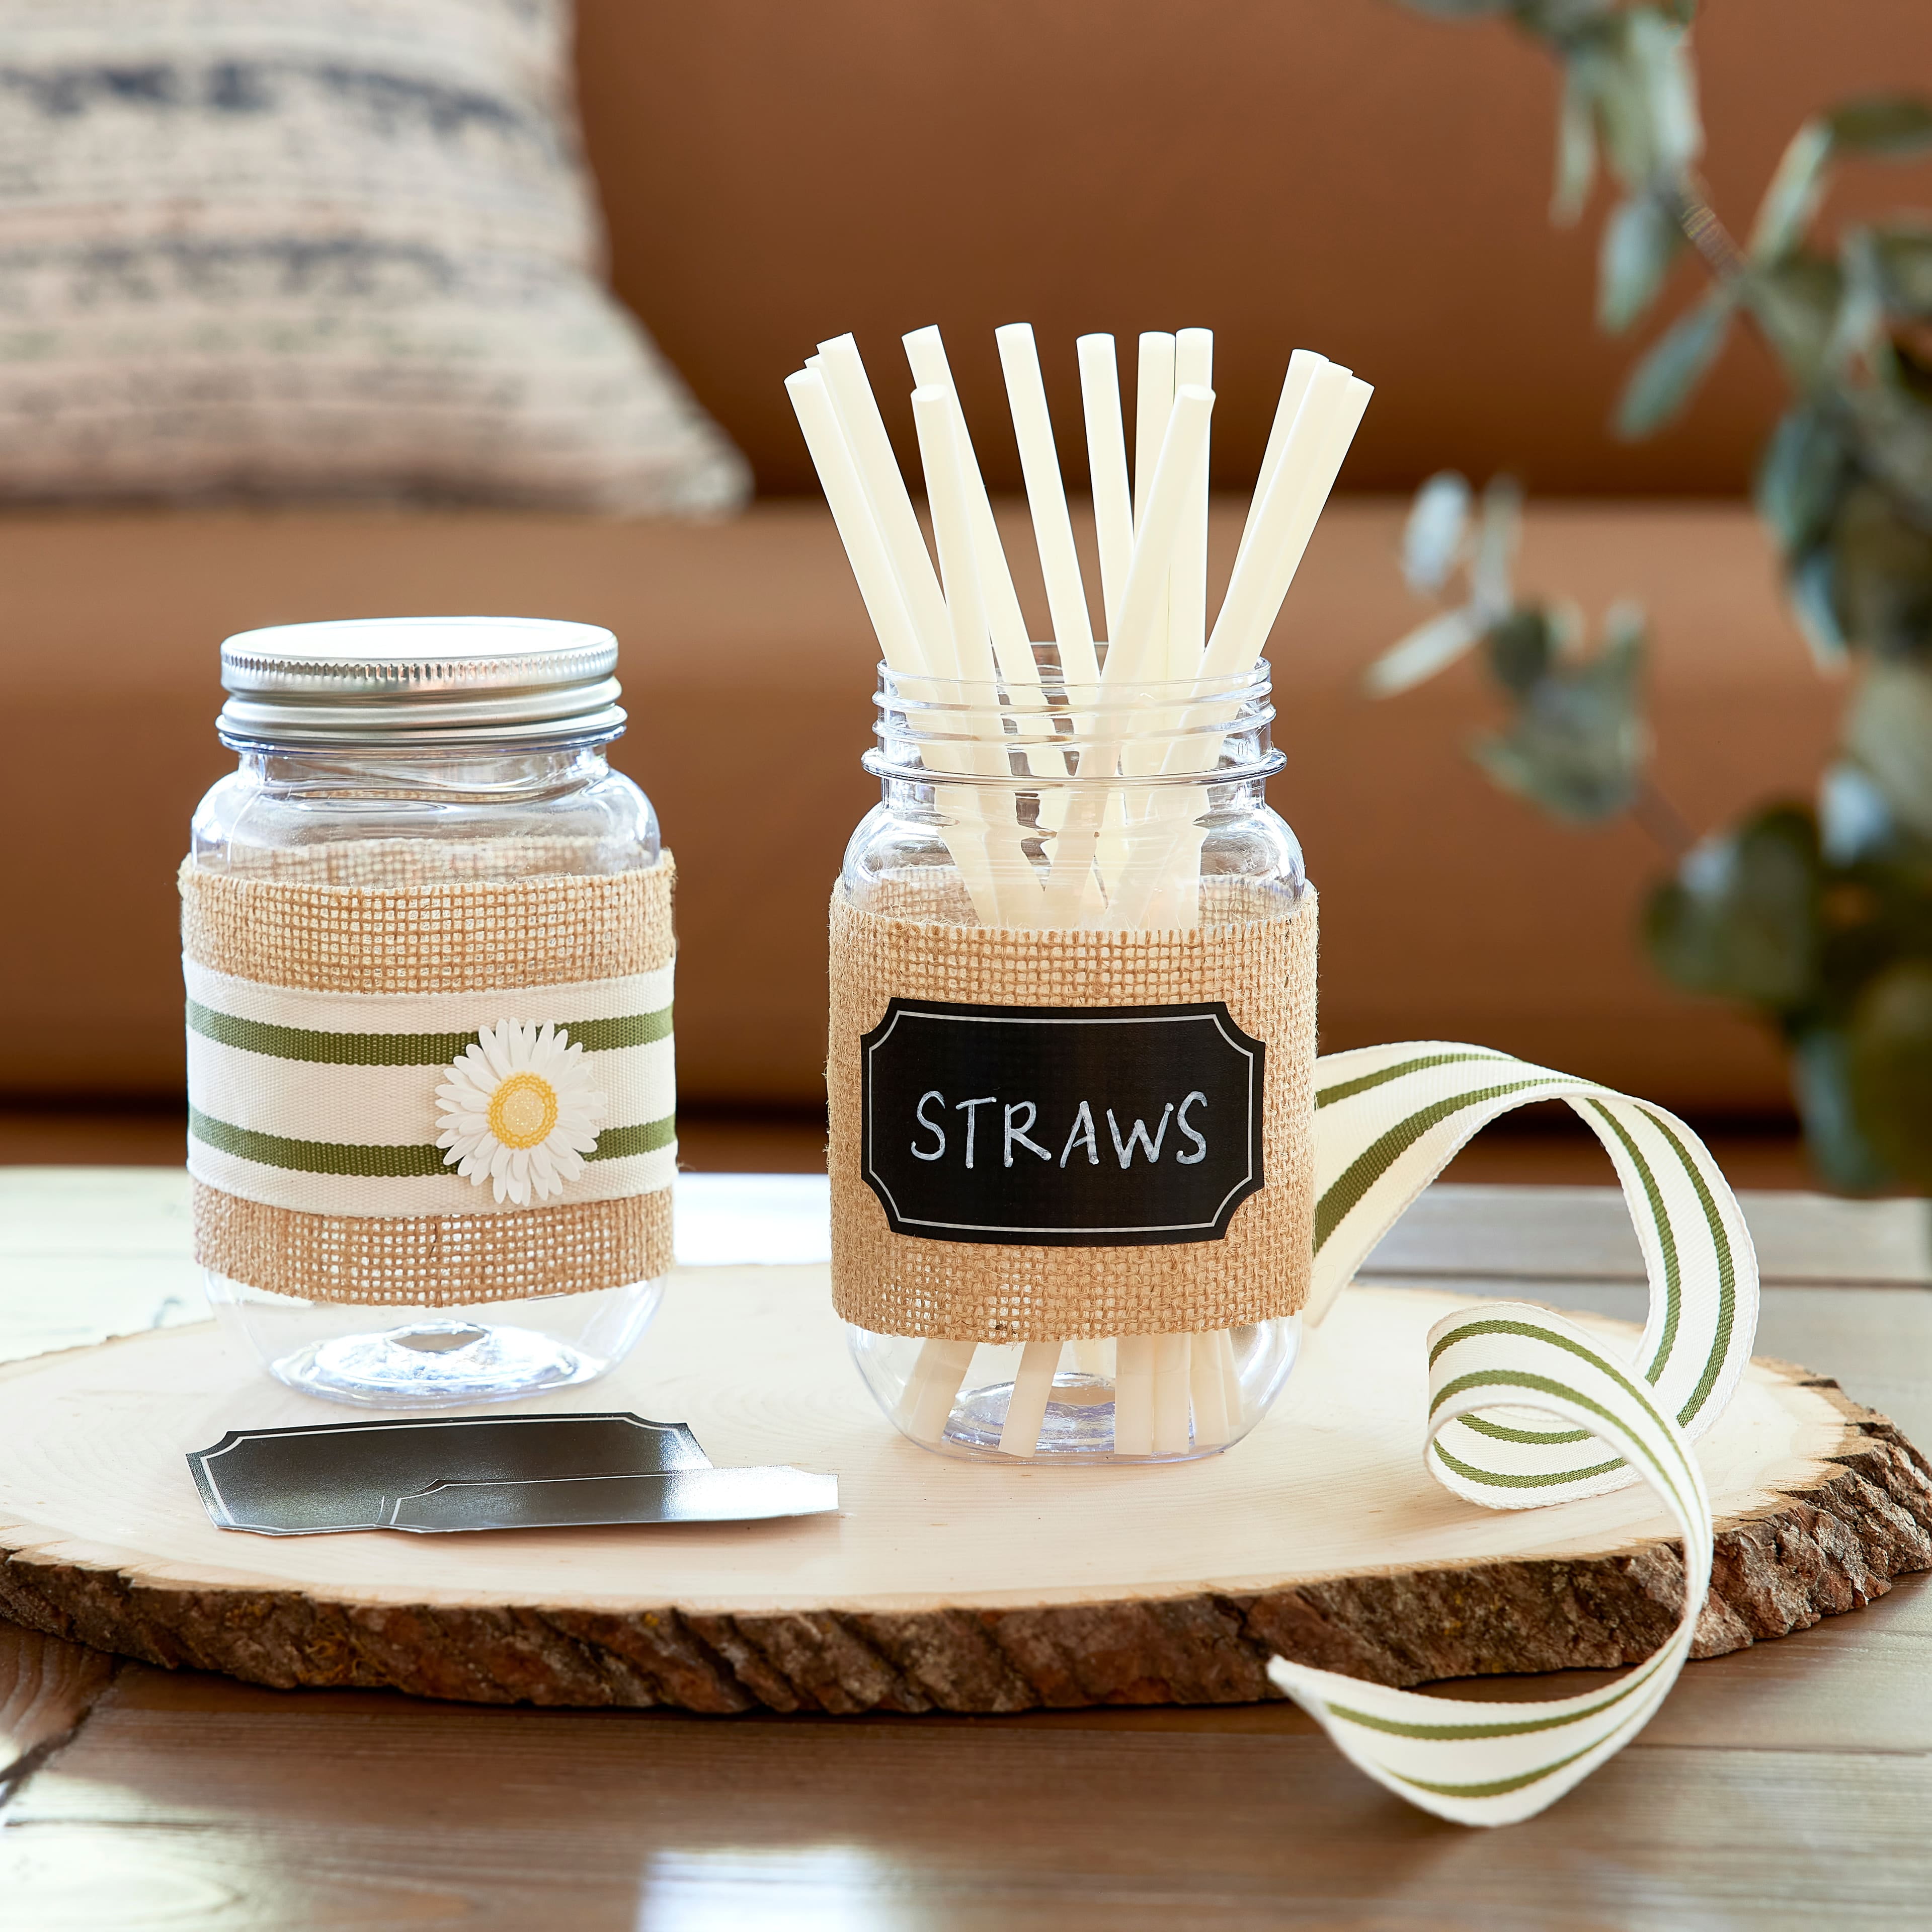 Craft Express 4 Pack of 12oz Frosted Mason Jars with Straws